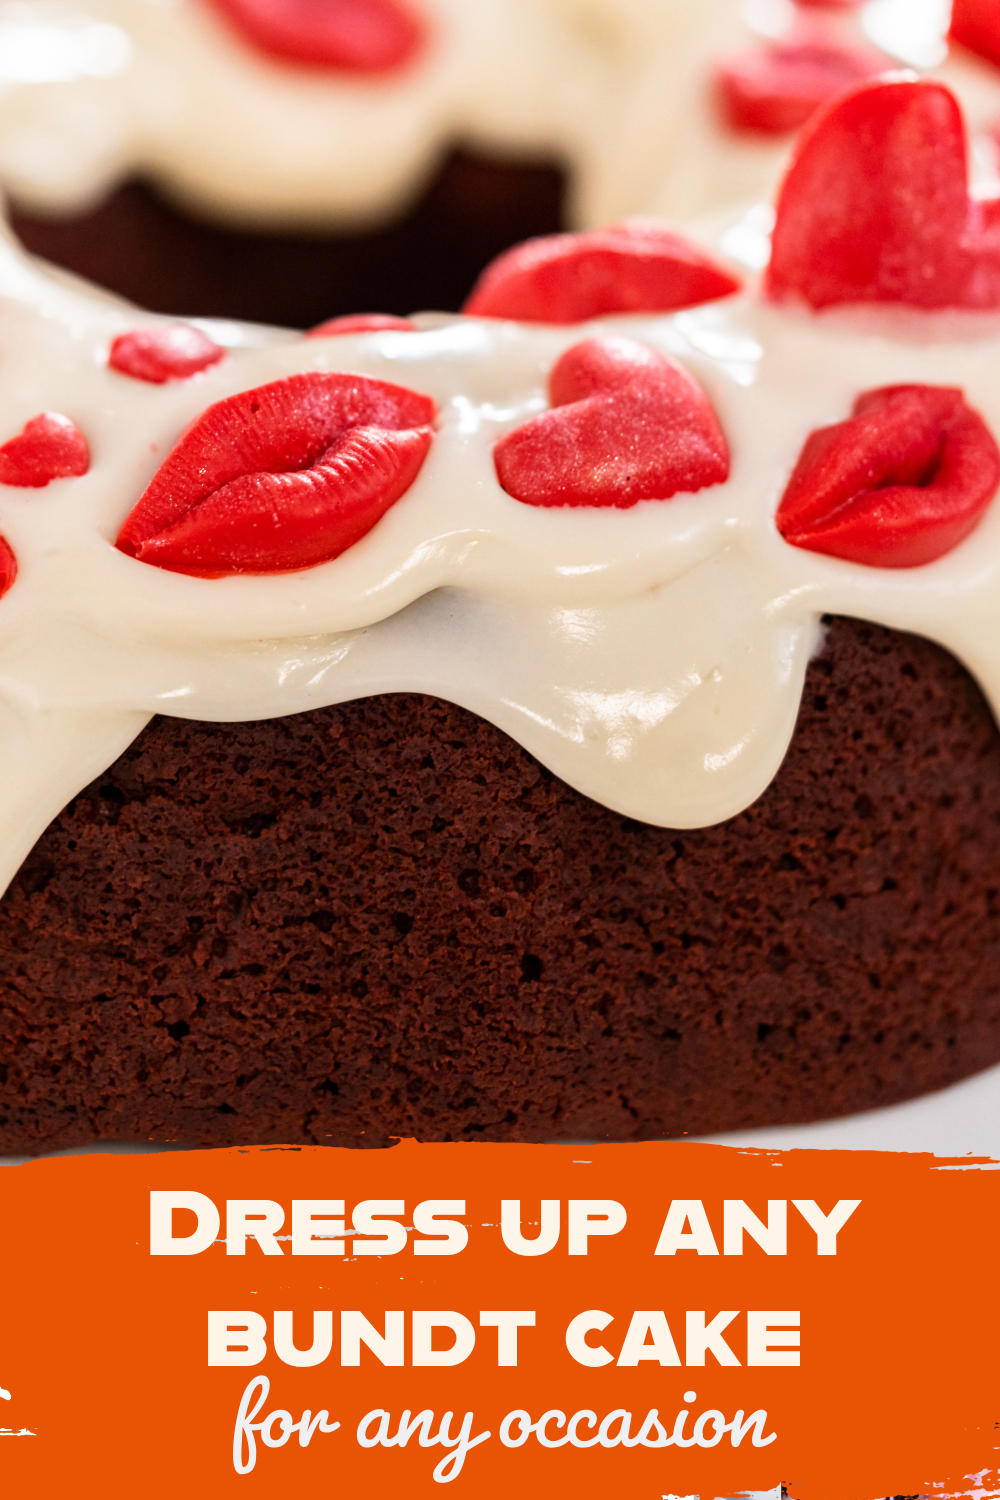 Dress Up Bundt Cake For Any Occasion